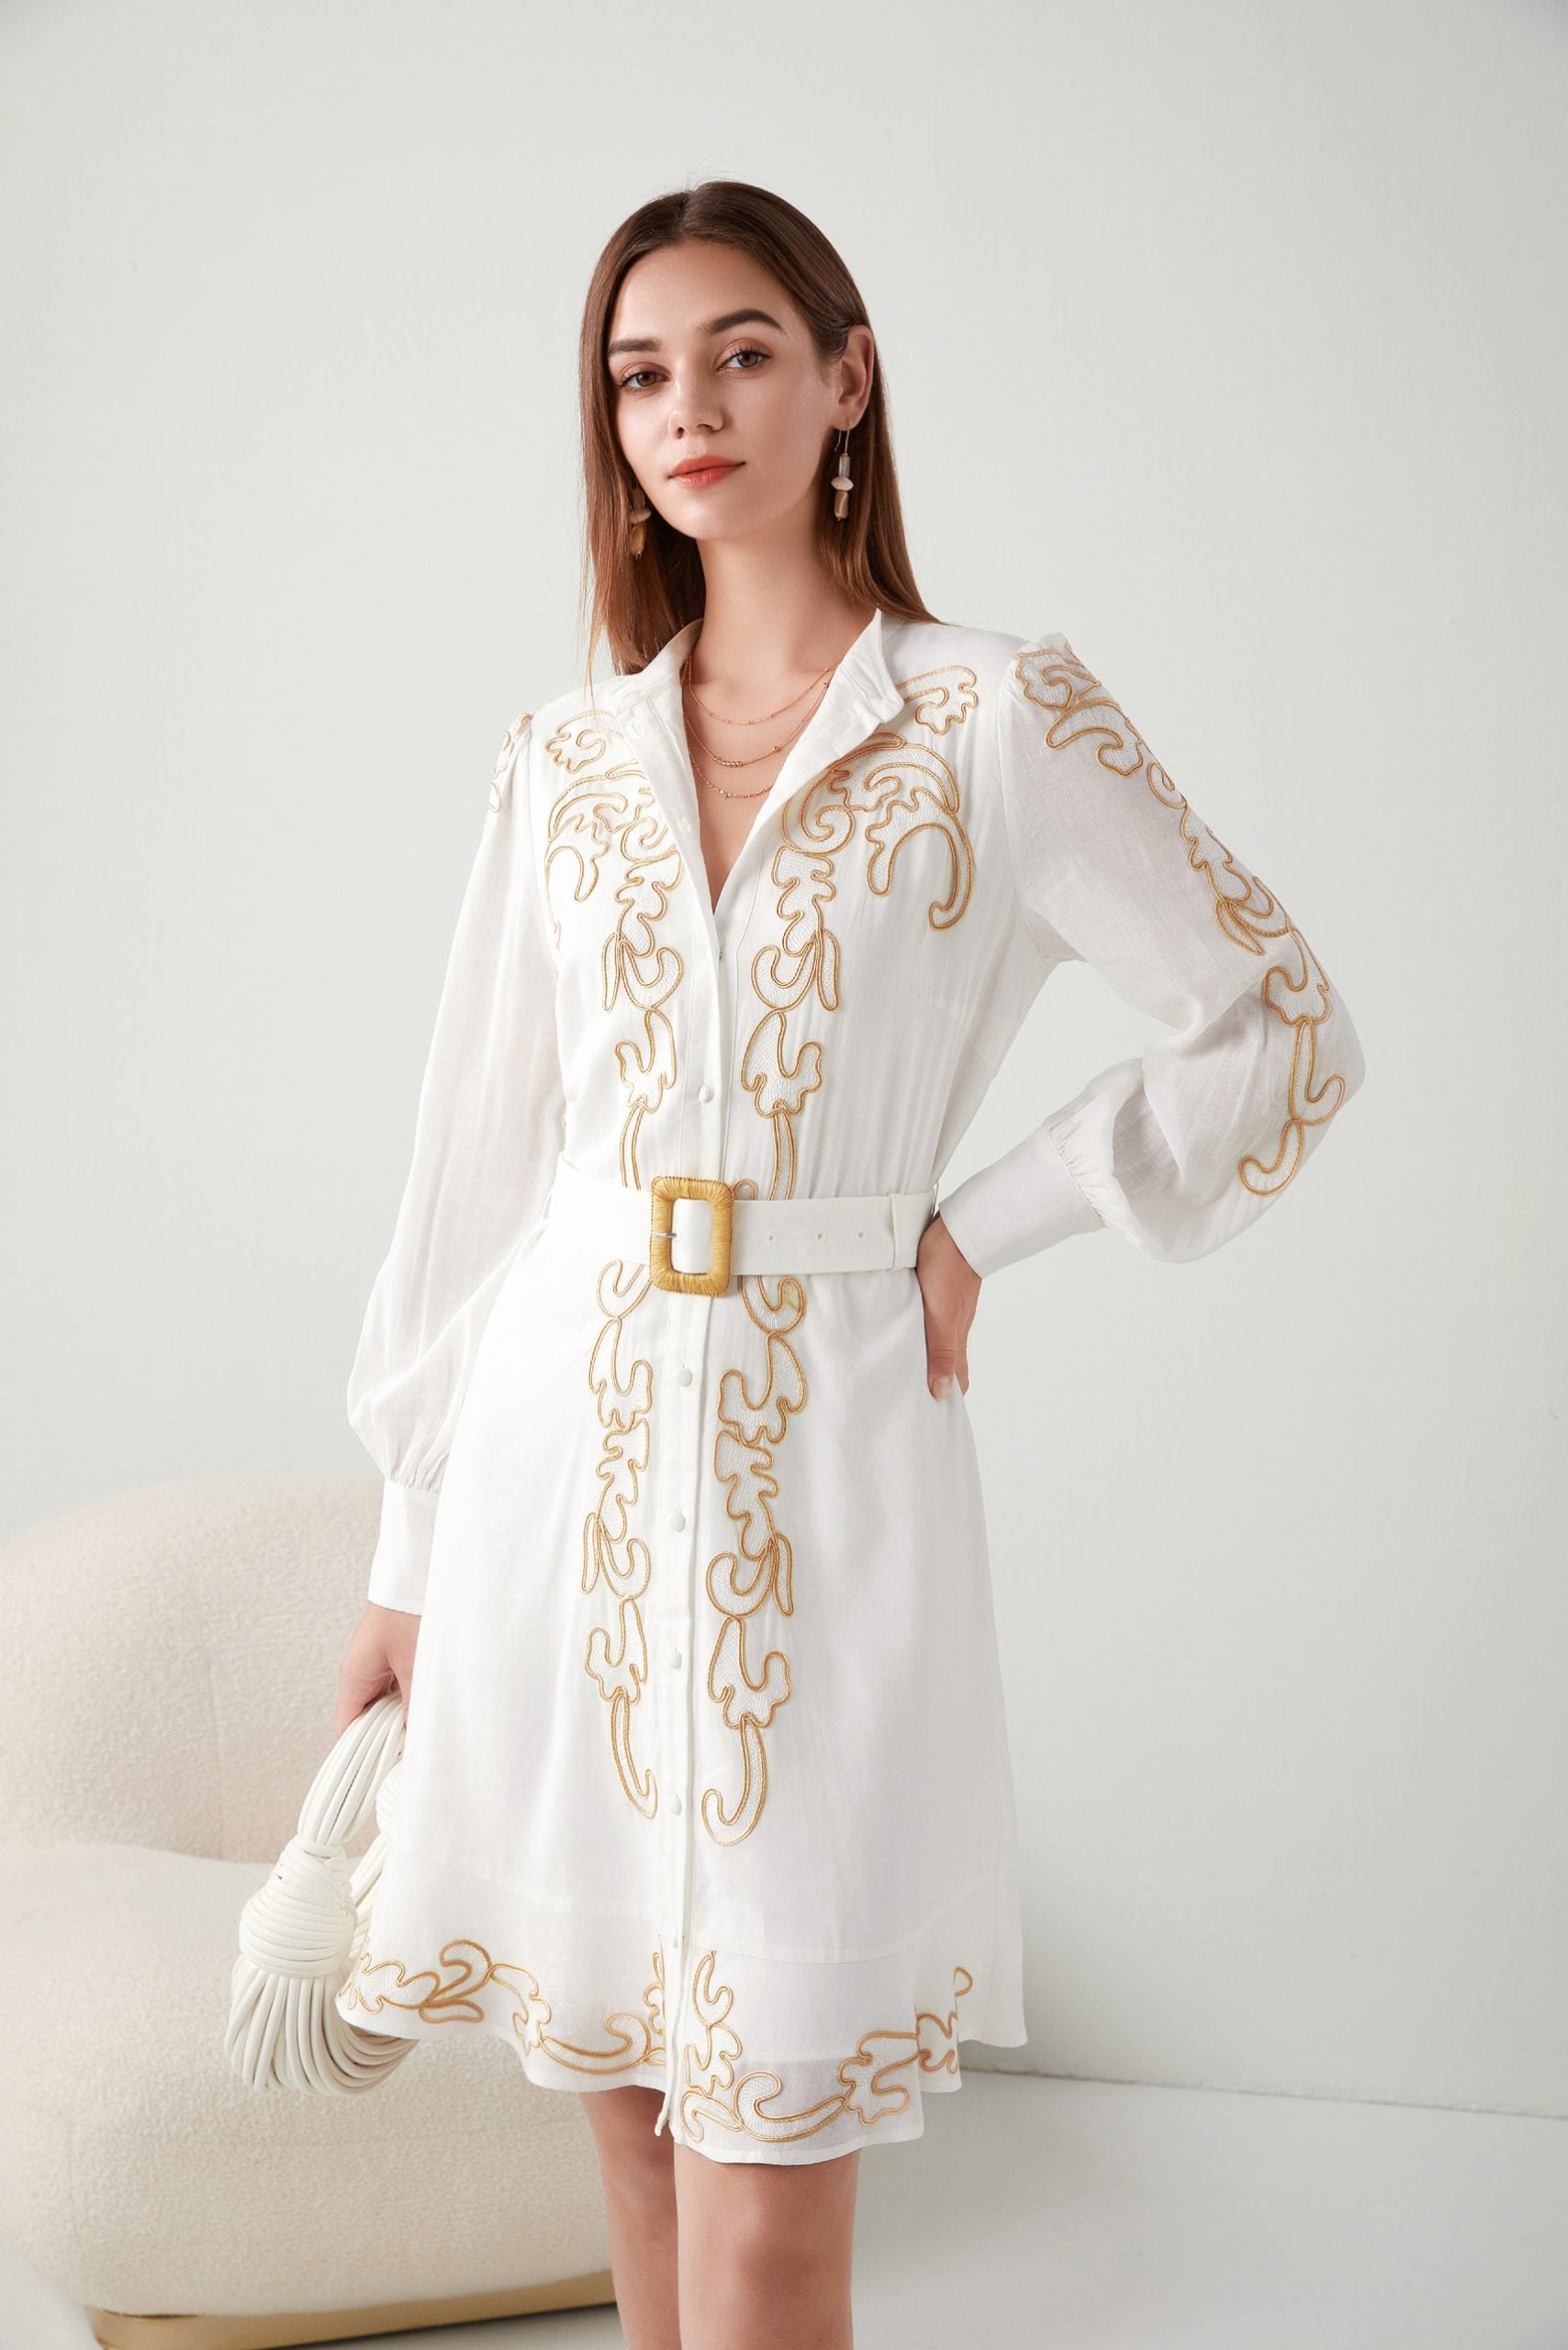 &quot;Elevate elegance: Short white dress with intricate embroidery. Shop now for timeless style!